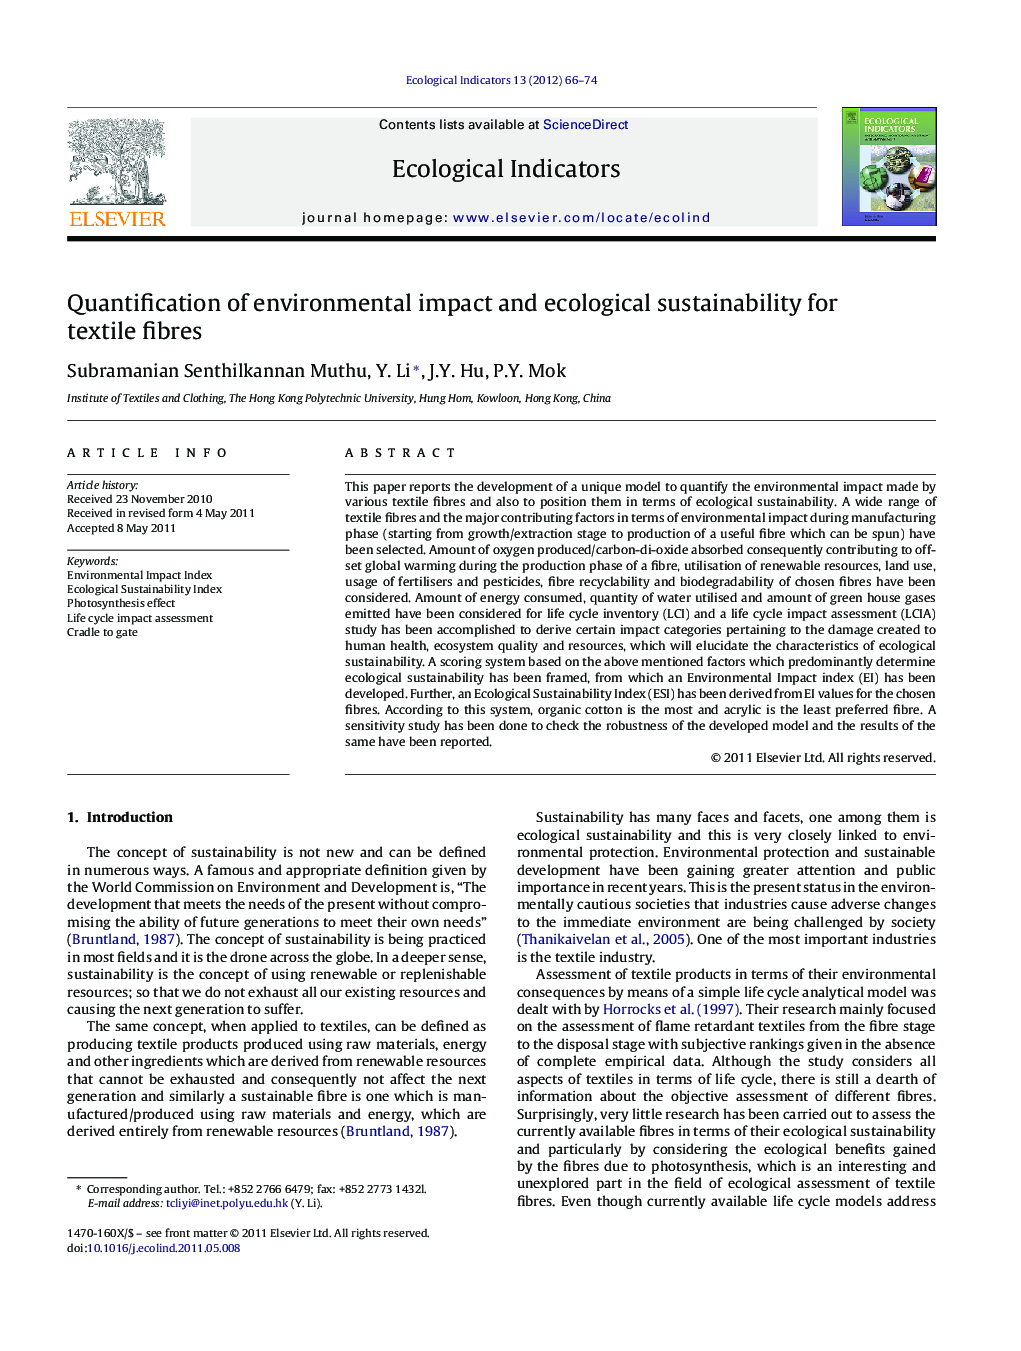 Quantification of environmental impact and ecological sustainability for textile fibres